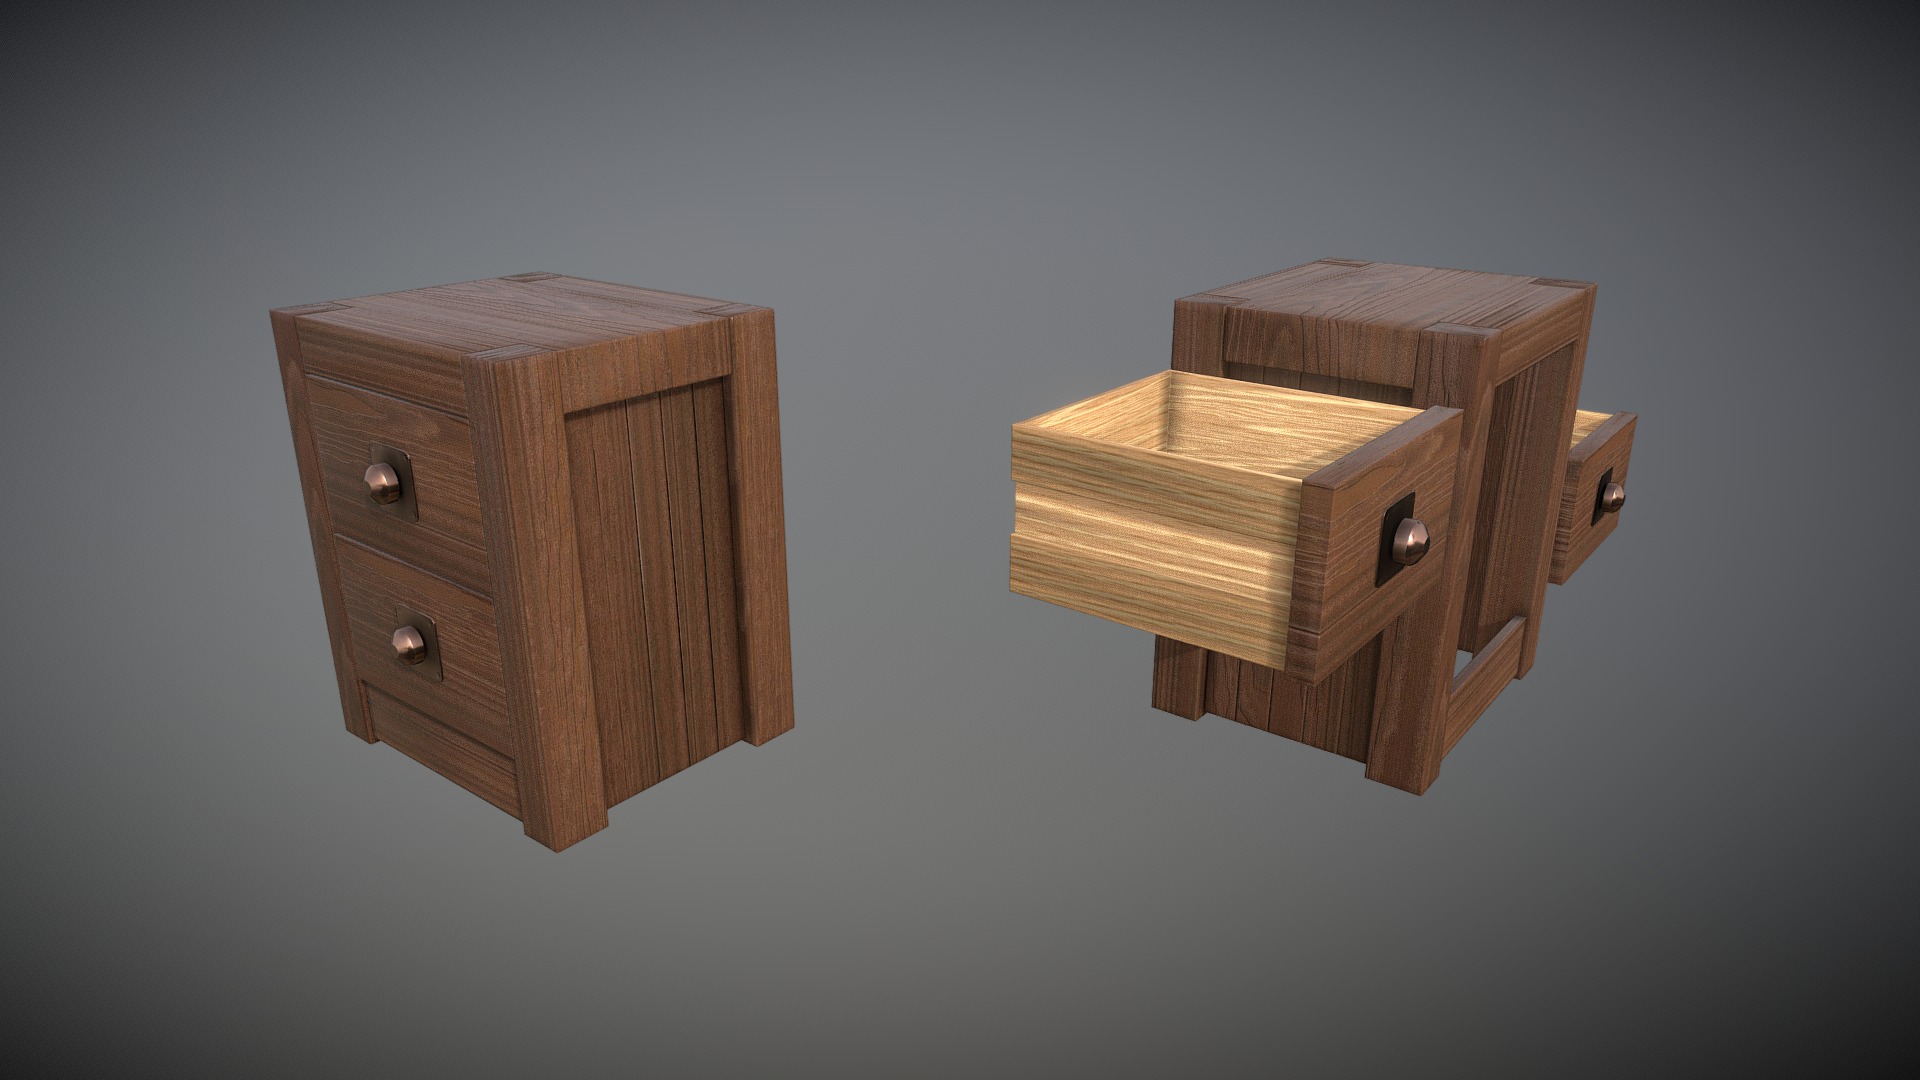 3D model Bedside Table A – Brown - This is a 3D model of the Bedside Table A - Brown. The 3D model is about two wooden birds on a white background.